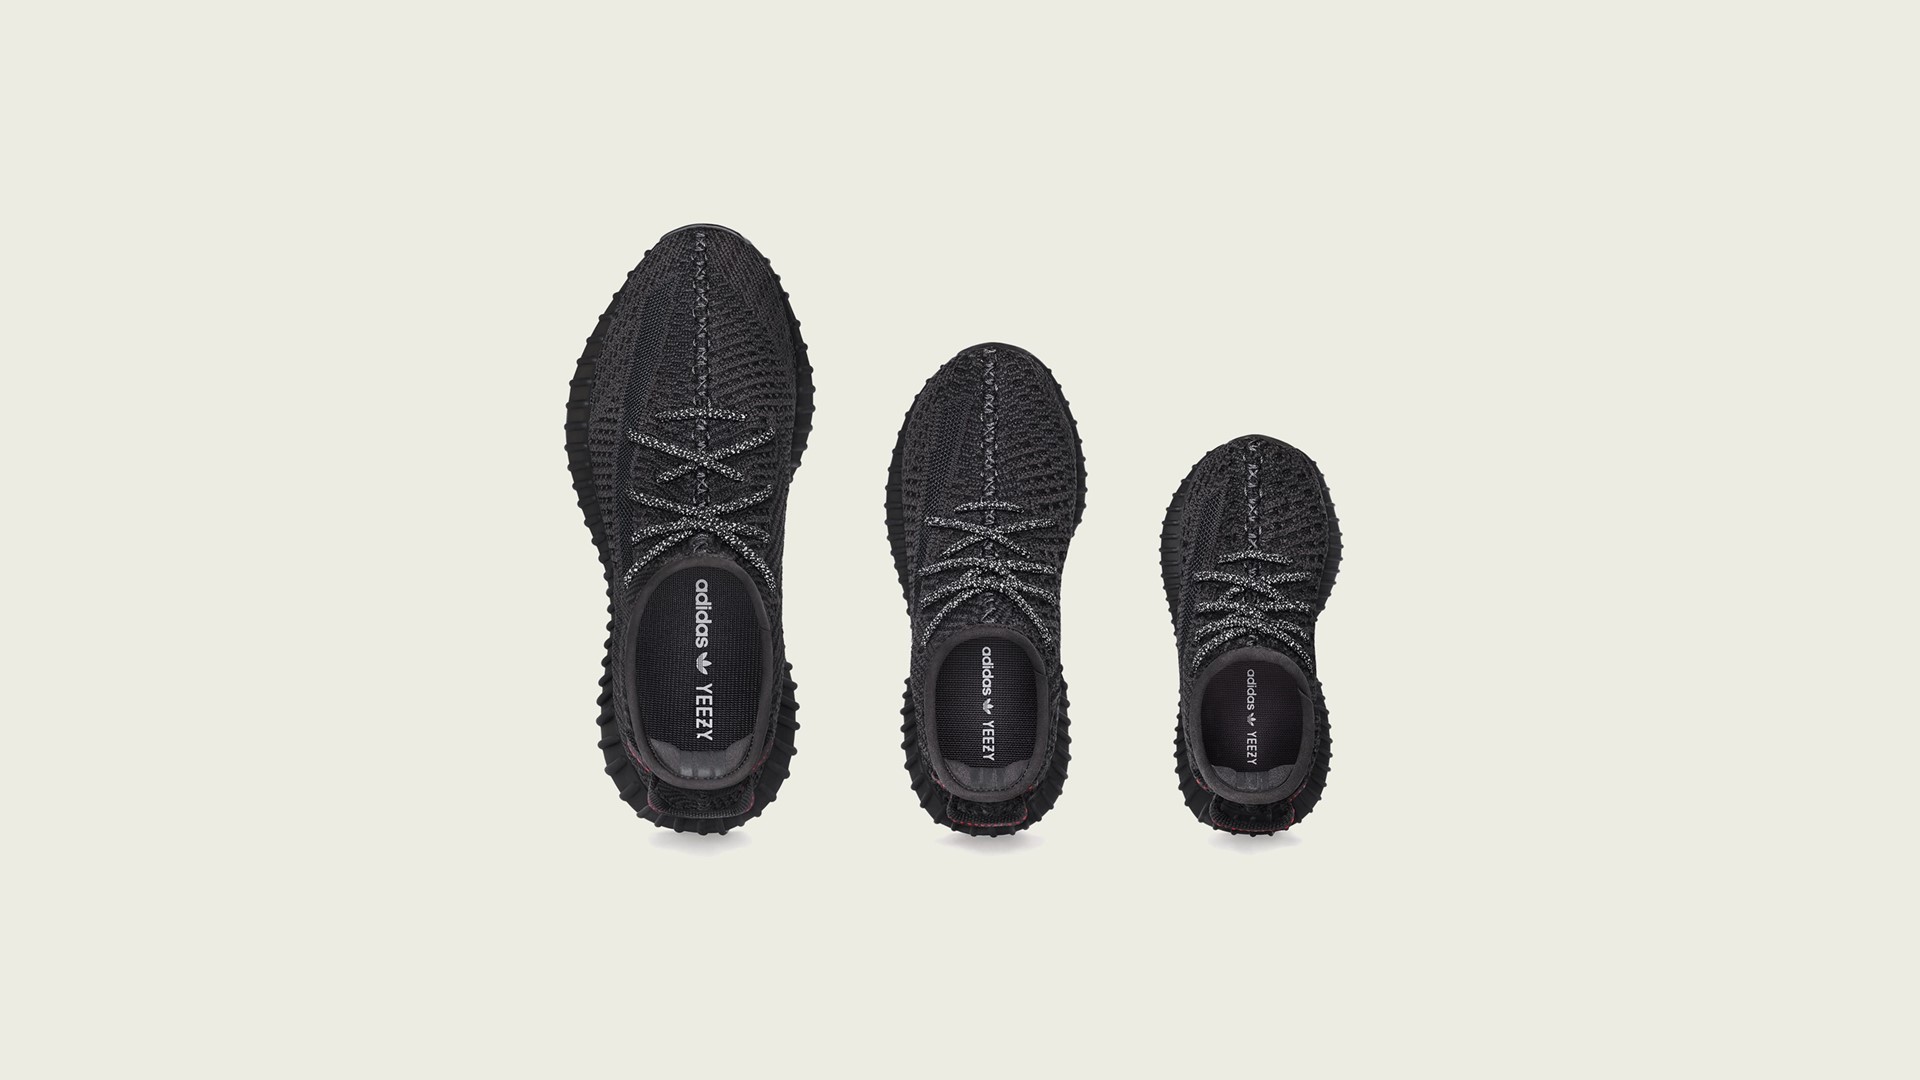 AIDS kas Uil adidas + KANYE WEST announce the YEEZY BOOST 350 V2 Black